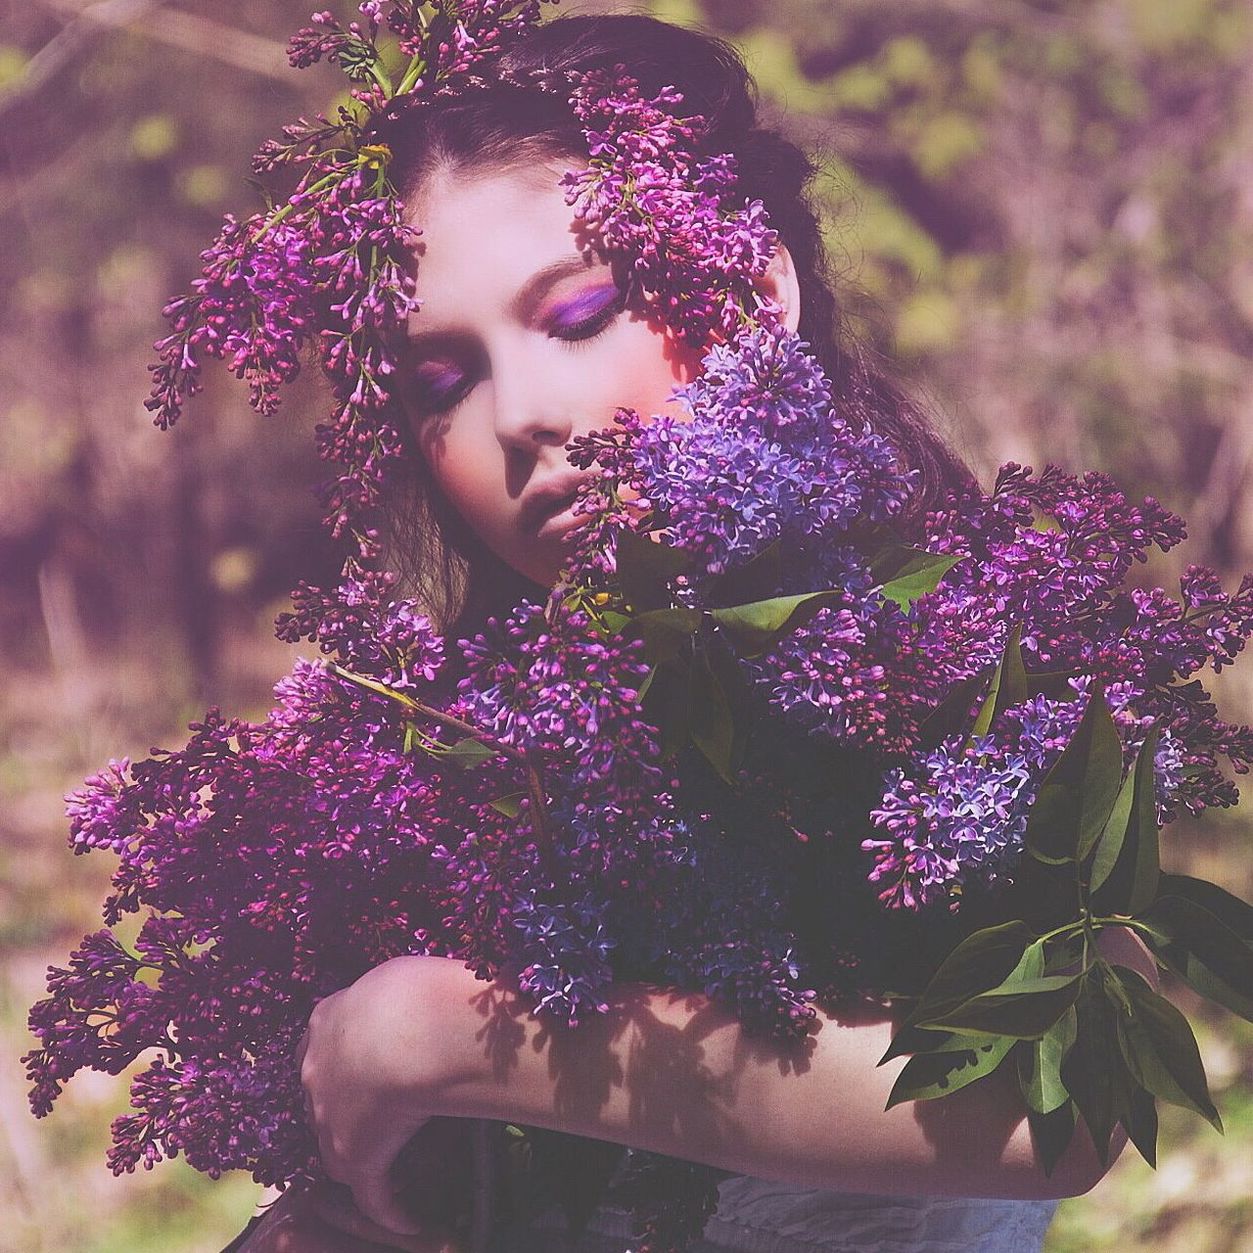 flower, purple, focus on foreground, lifestyles, leisure activity, fragility, pink color, close-up, freshness, person, holding, plant, petal, outdoors, young women, nature, celebration, growth